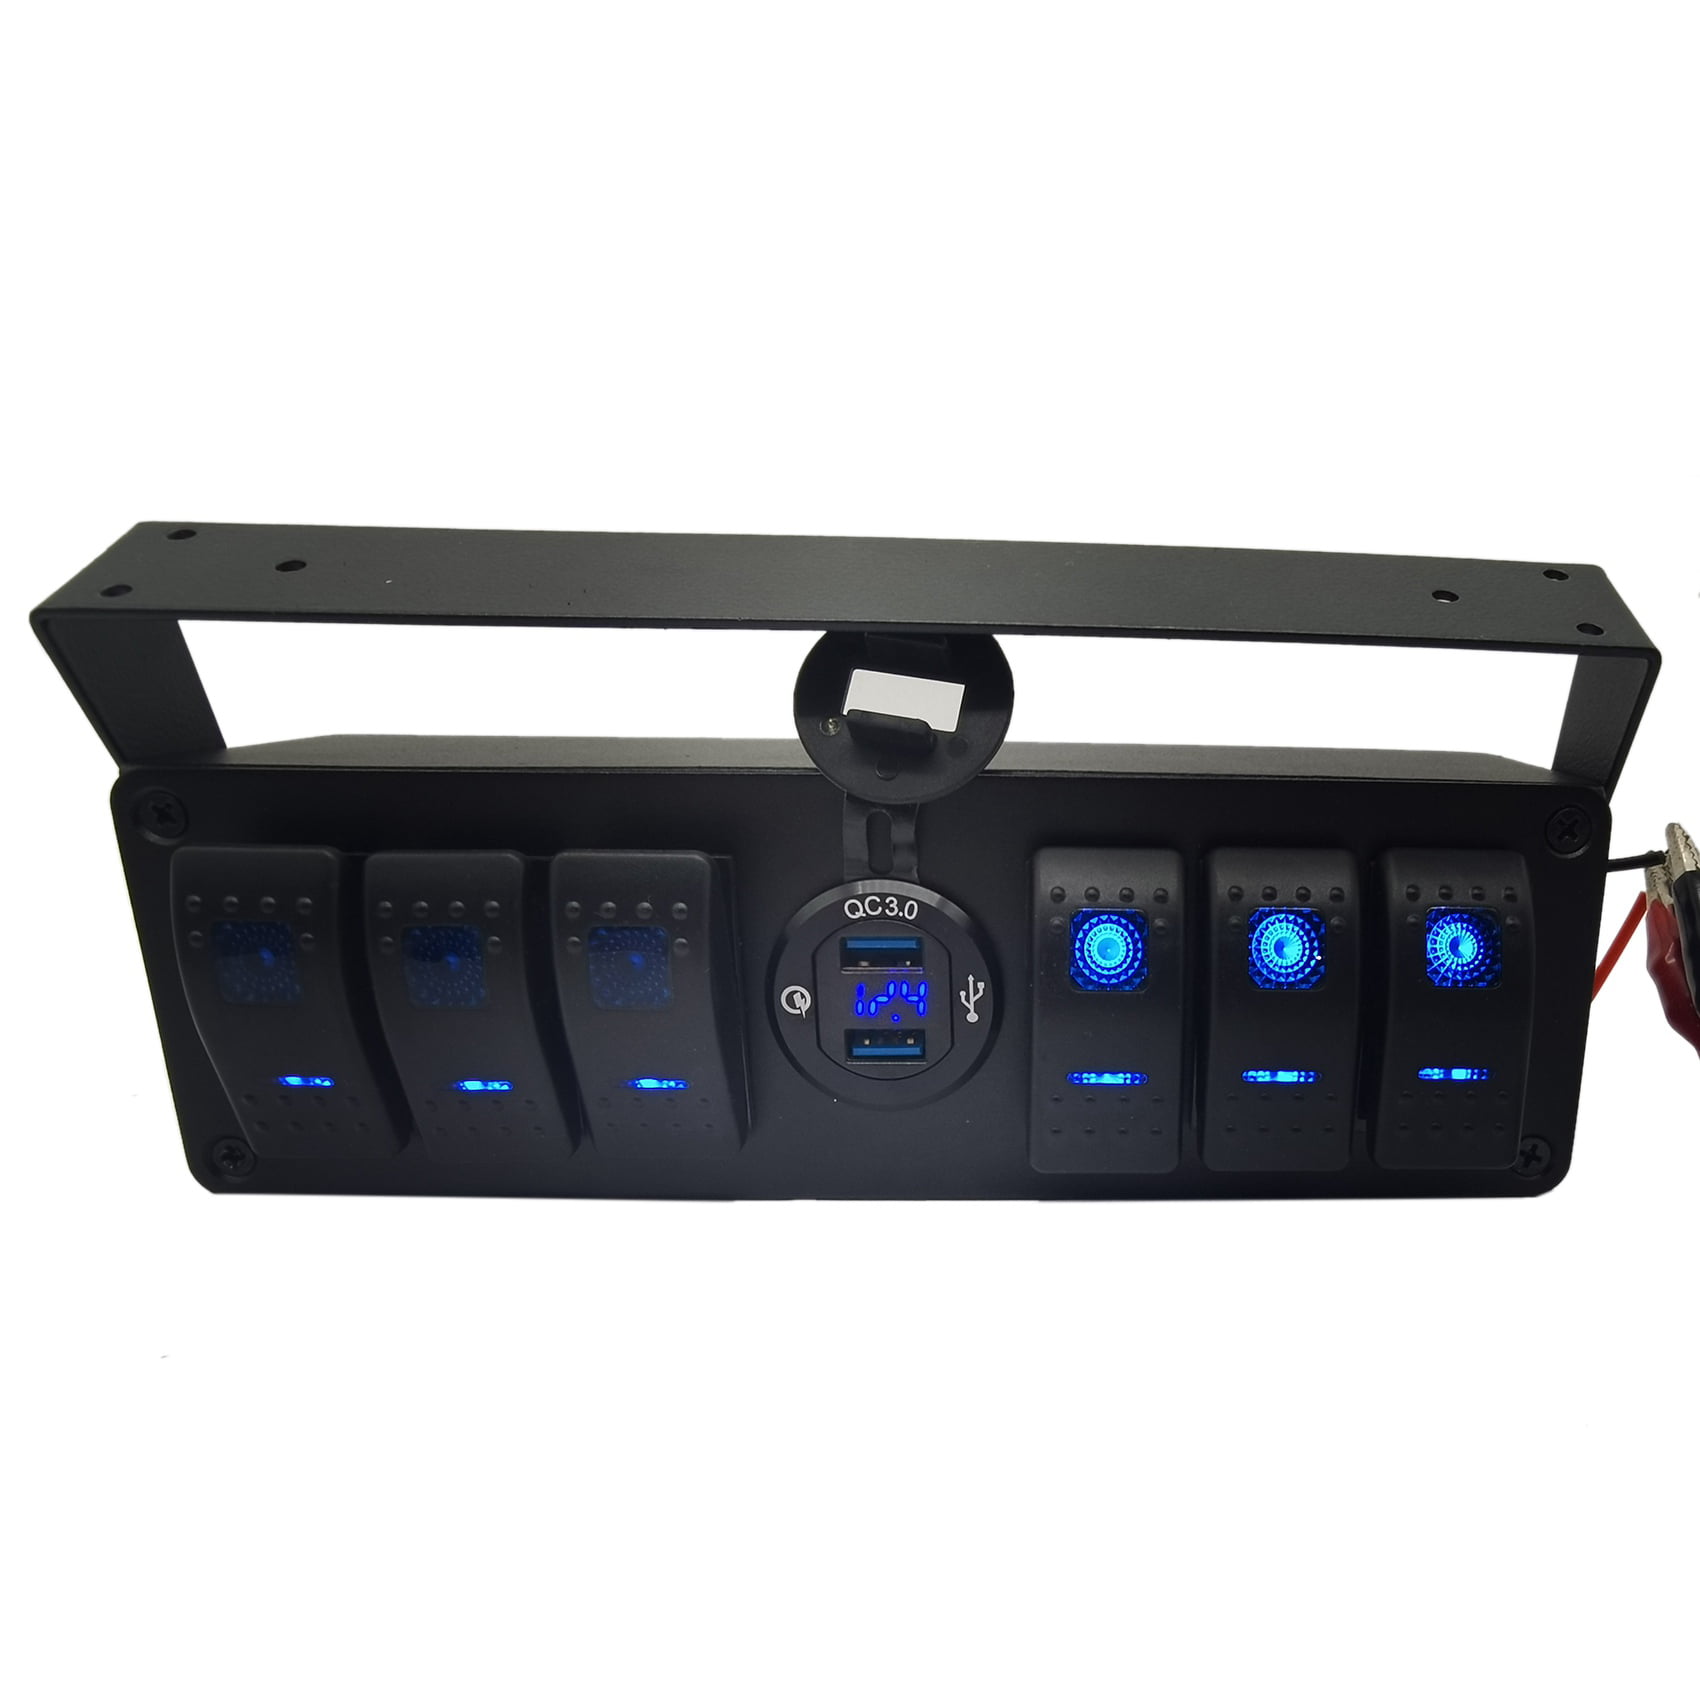 Illuminated Rocker Switch box for Pond Pumps Filters etc and Outdoor Lighting 